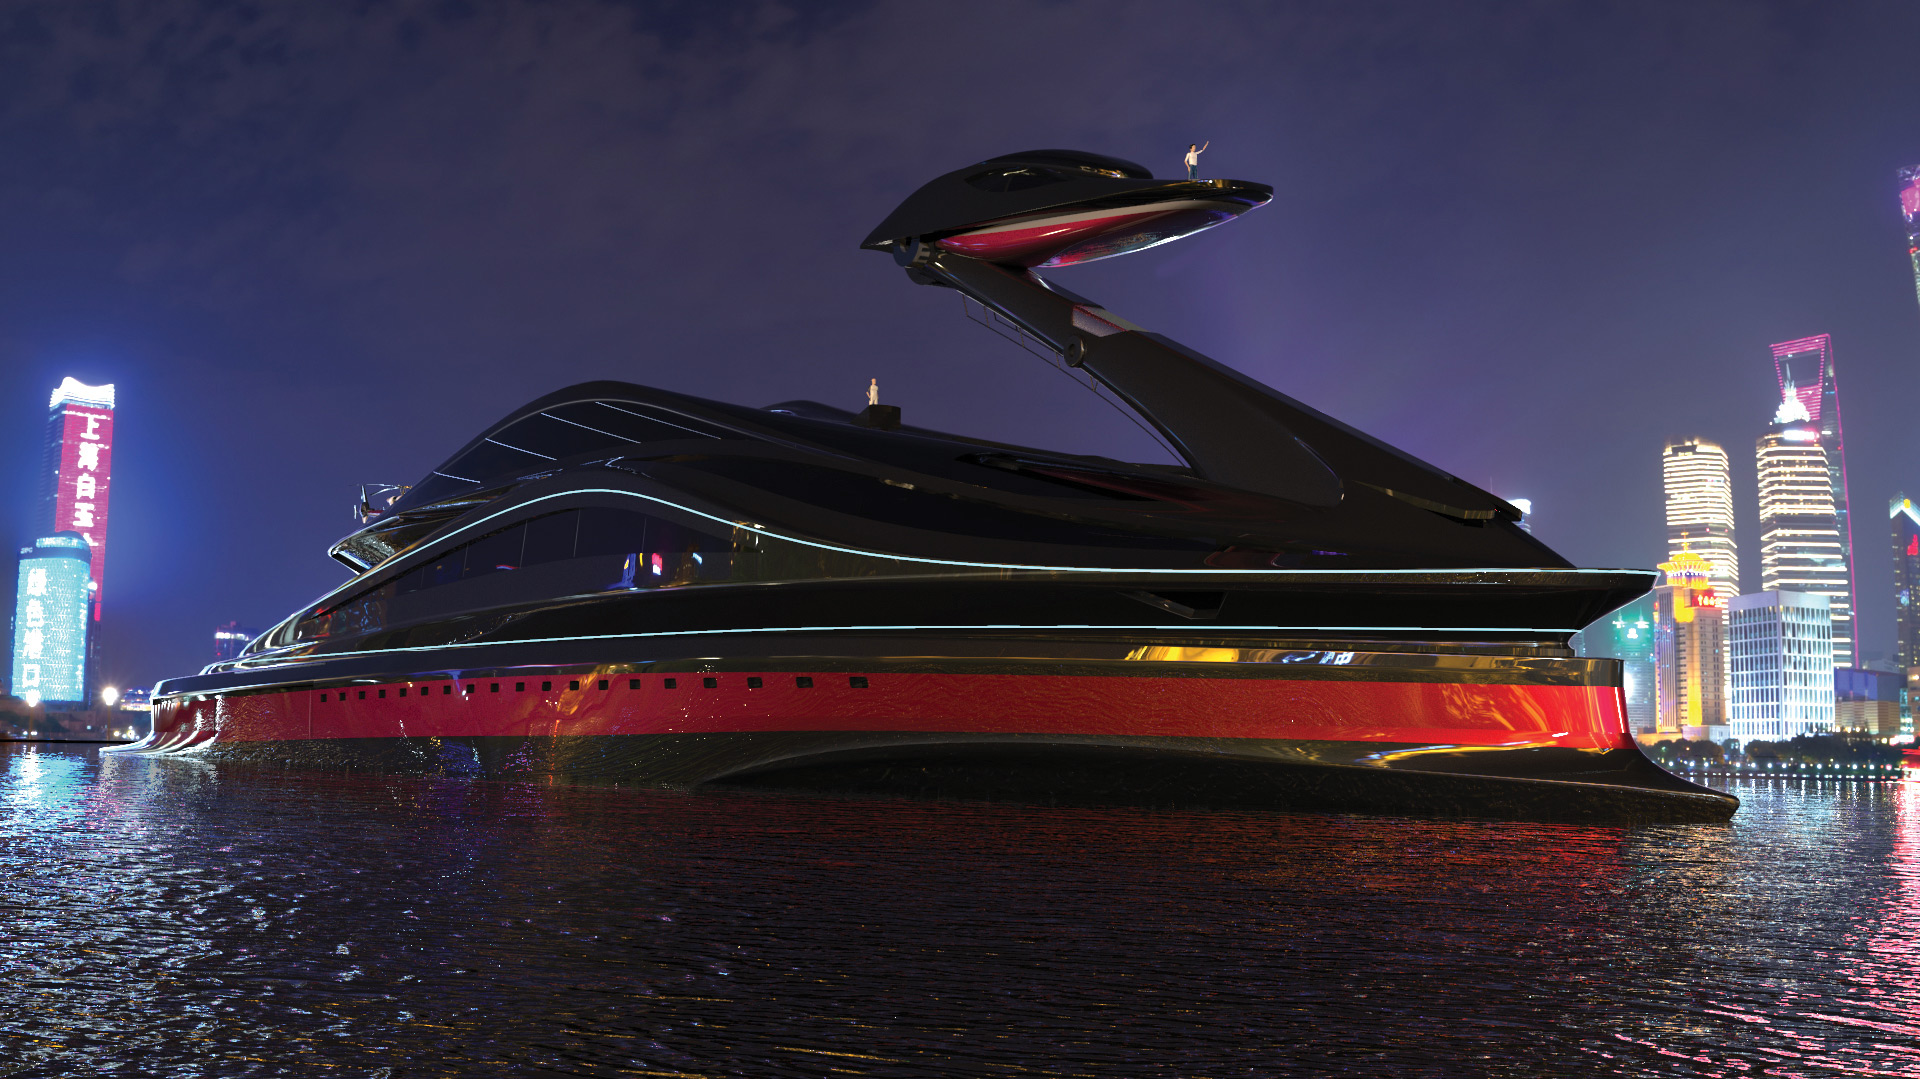 Lazzarini Superyacht – Not Your Usual Swan Song